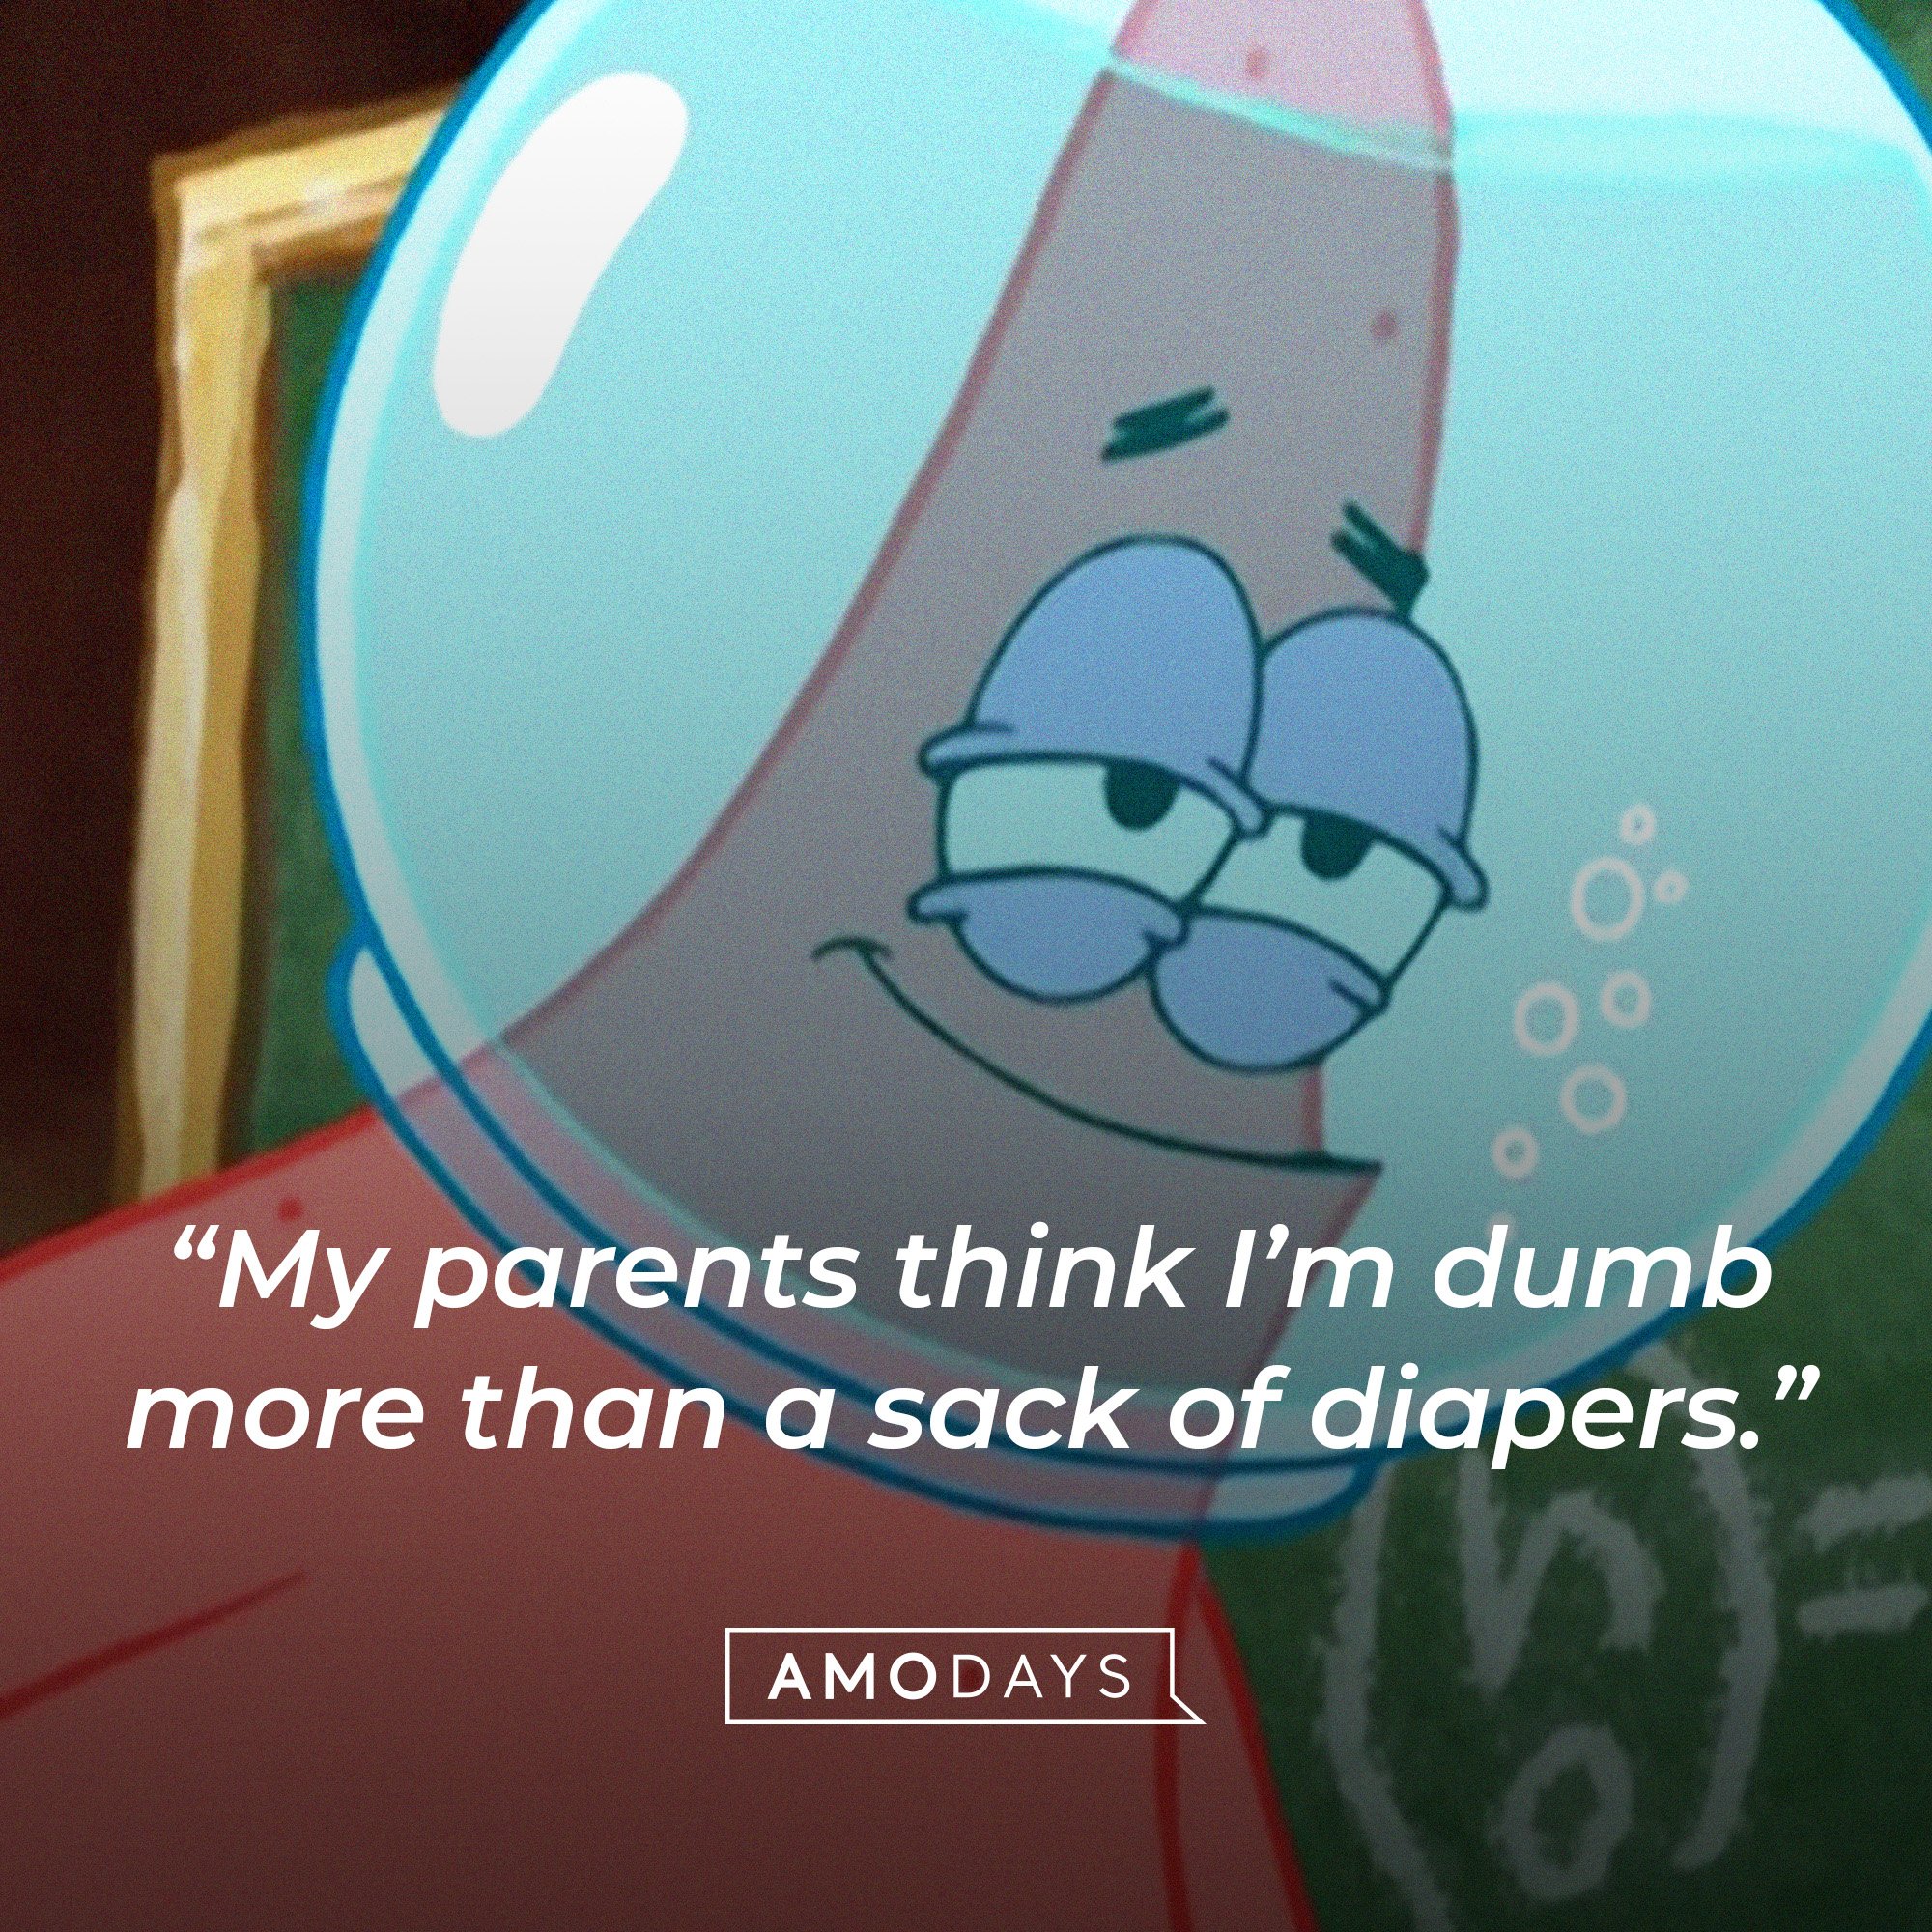 Patrick Star’s quote: "My parents think I'm dumb more than a sack of diapers." | Image: AmoDays